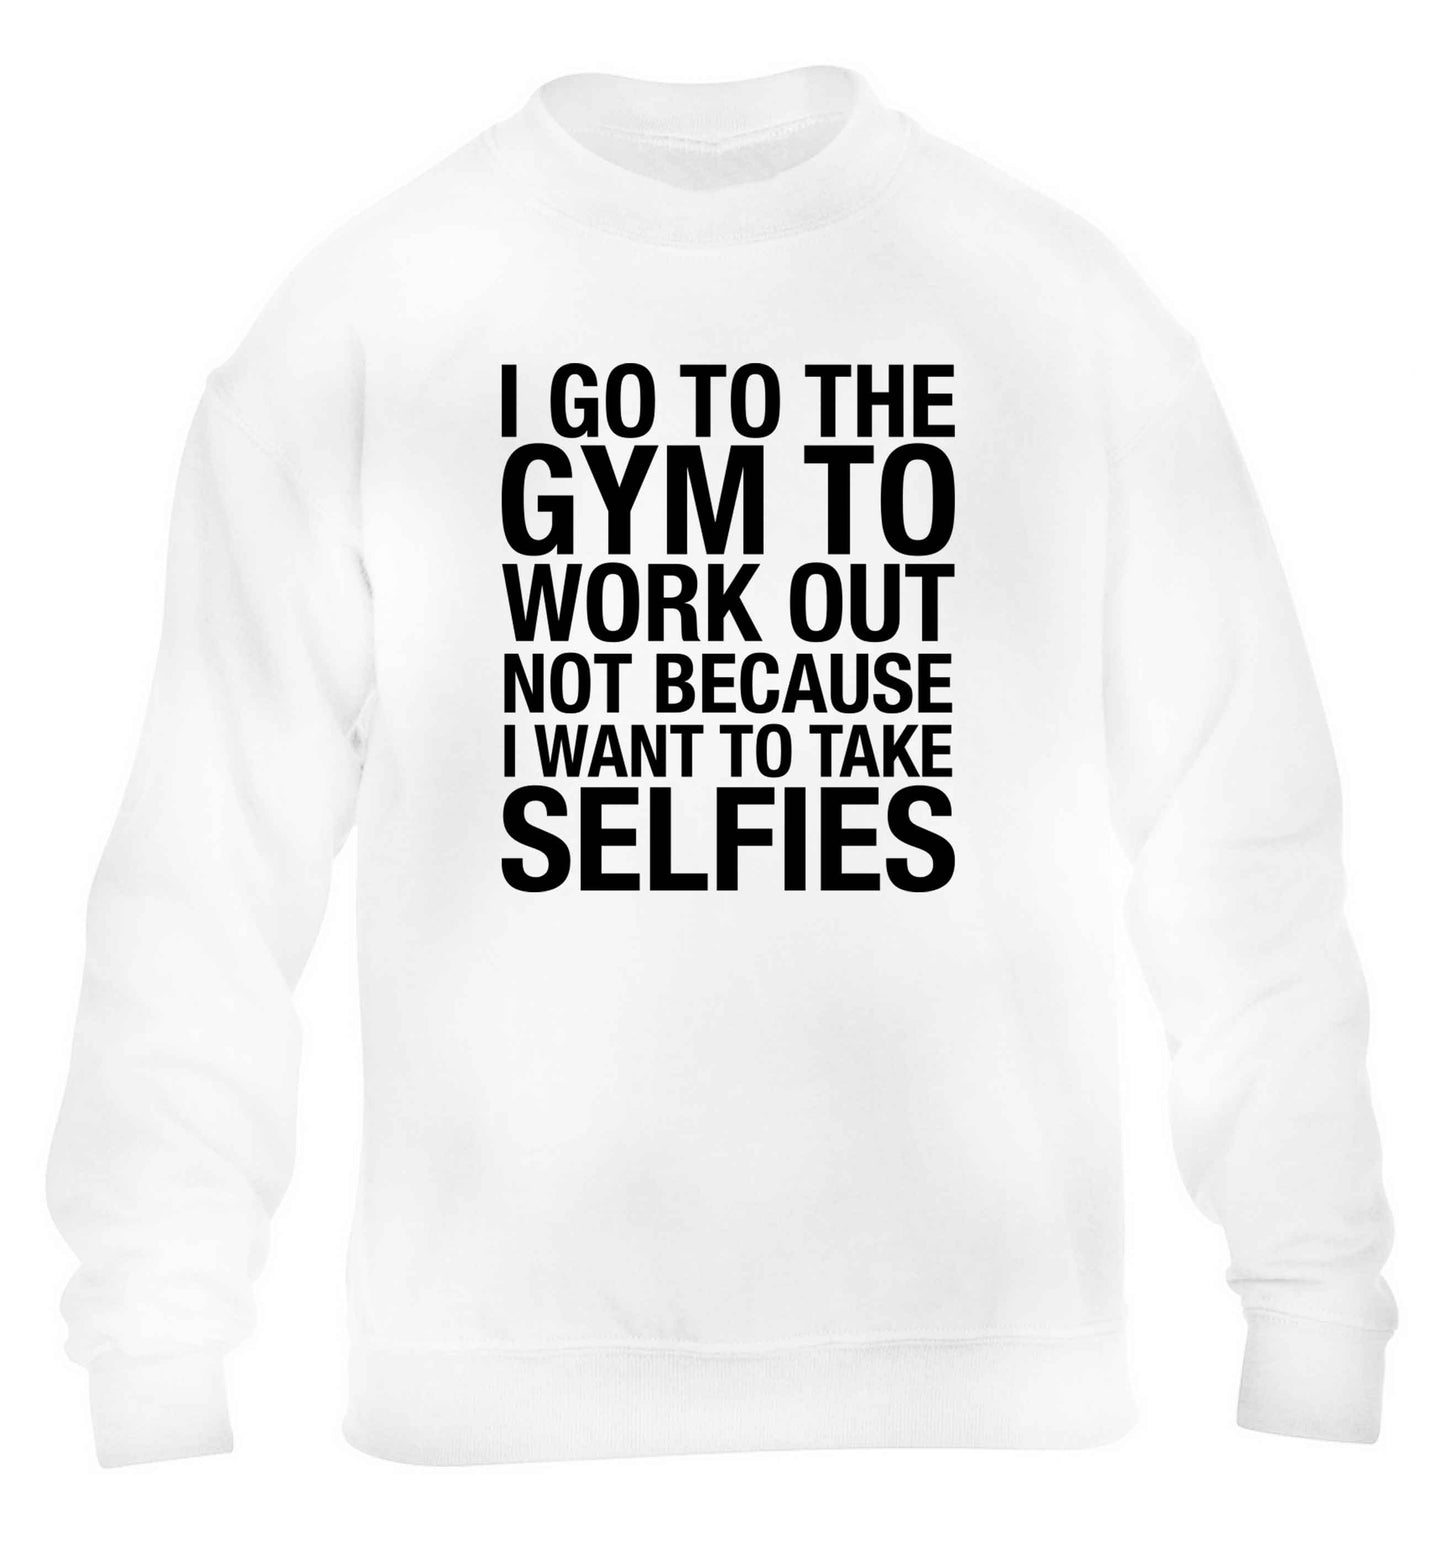 I go to the gym to workout not to take selfies children's white sweater 12-13 Years